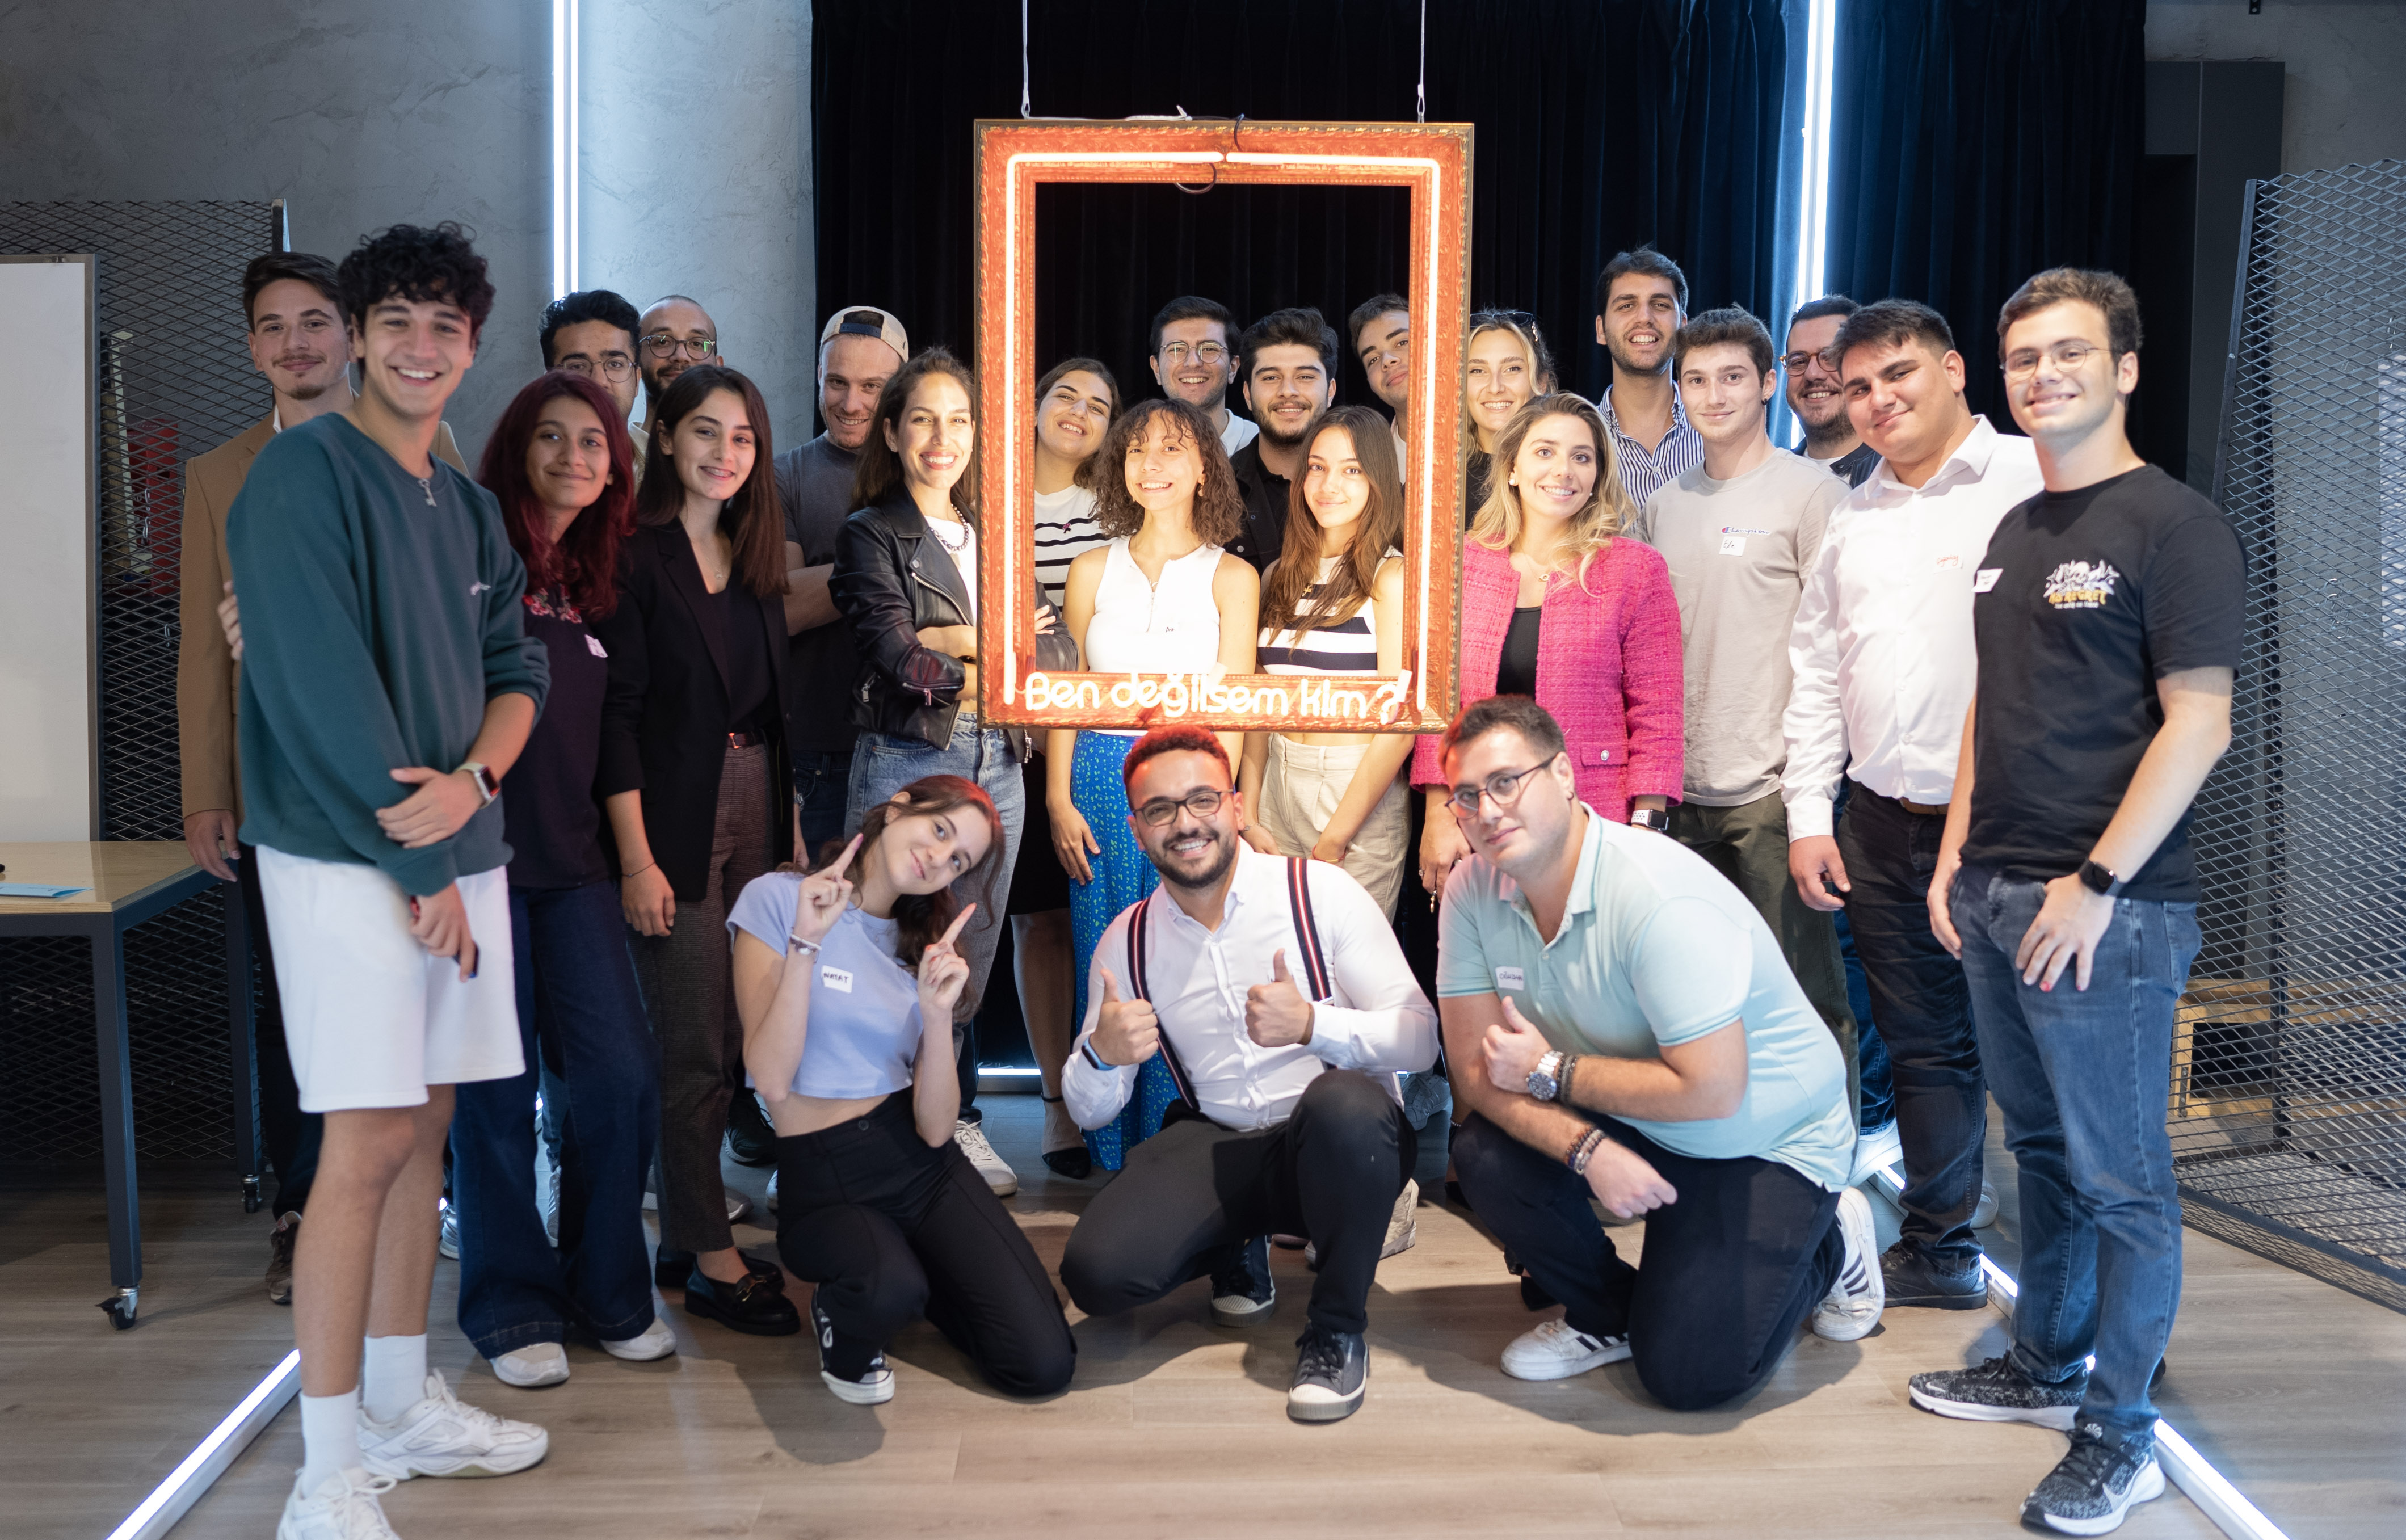 Young people from across Türkiye came together with HeForShe Advocate Kerem Bürsin to celebrate the movement’s 8th birthday in the country. Photo: UN Women/İlkin Eskipehlivan.